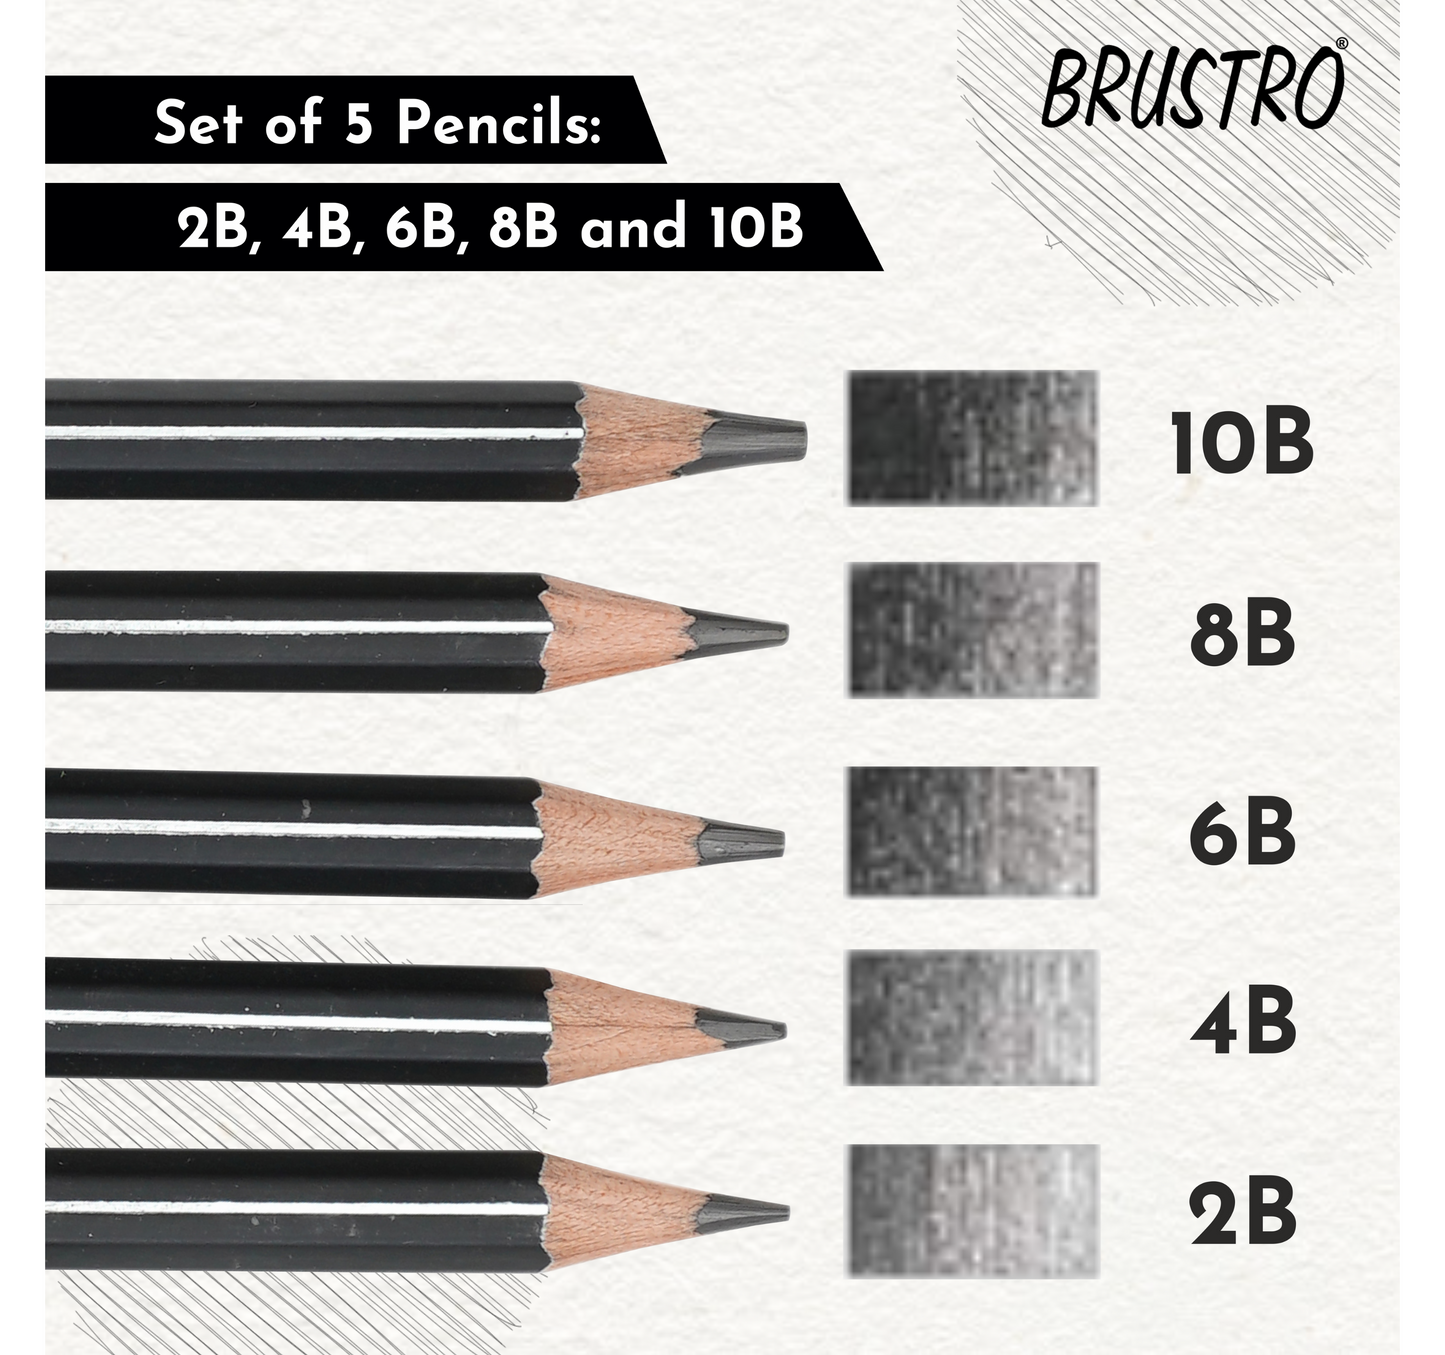 BRUSTRO Battery Operated Automatic Eraser with Artists FINEART Graphite Pencil Set of 12 (10B-2H)